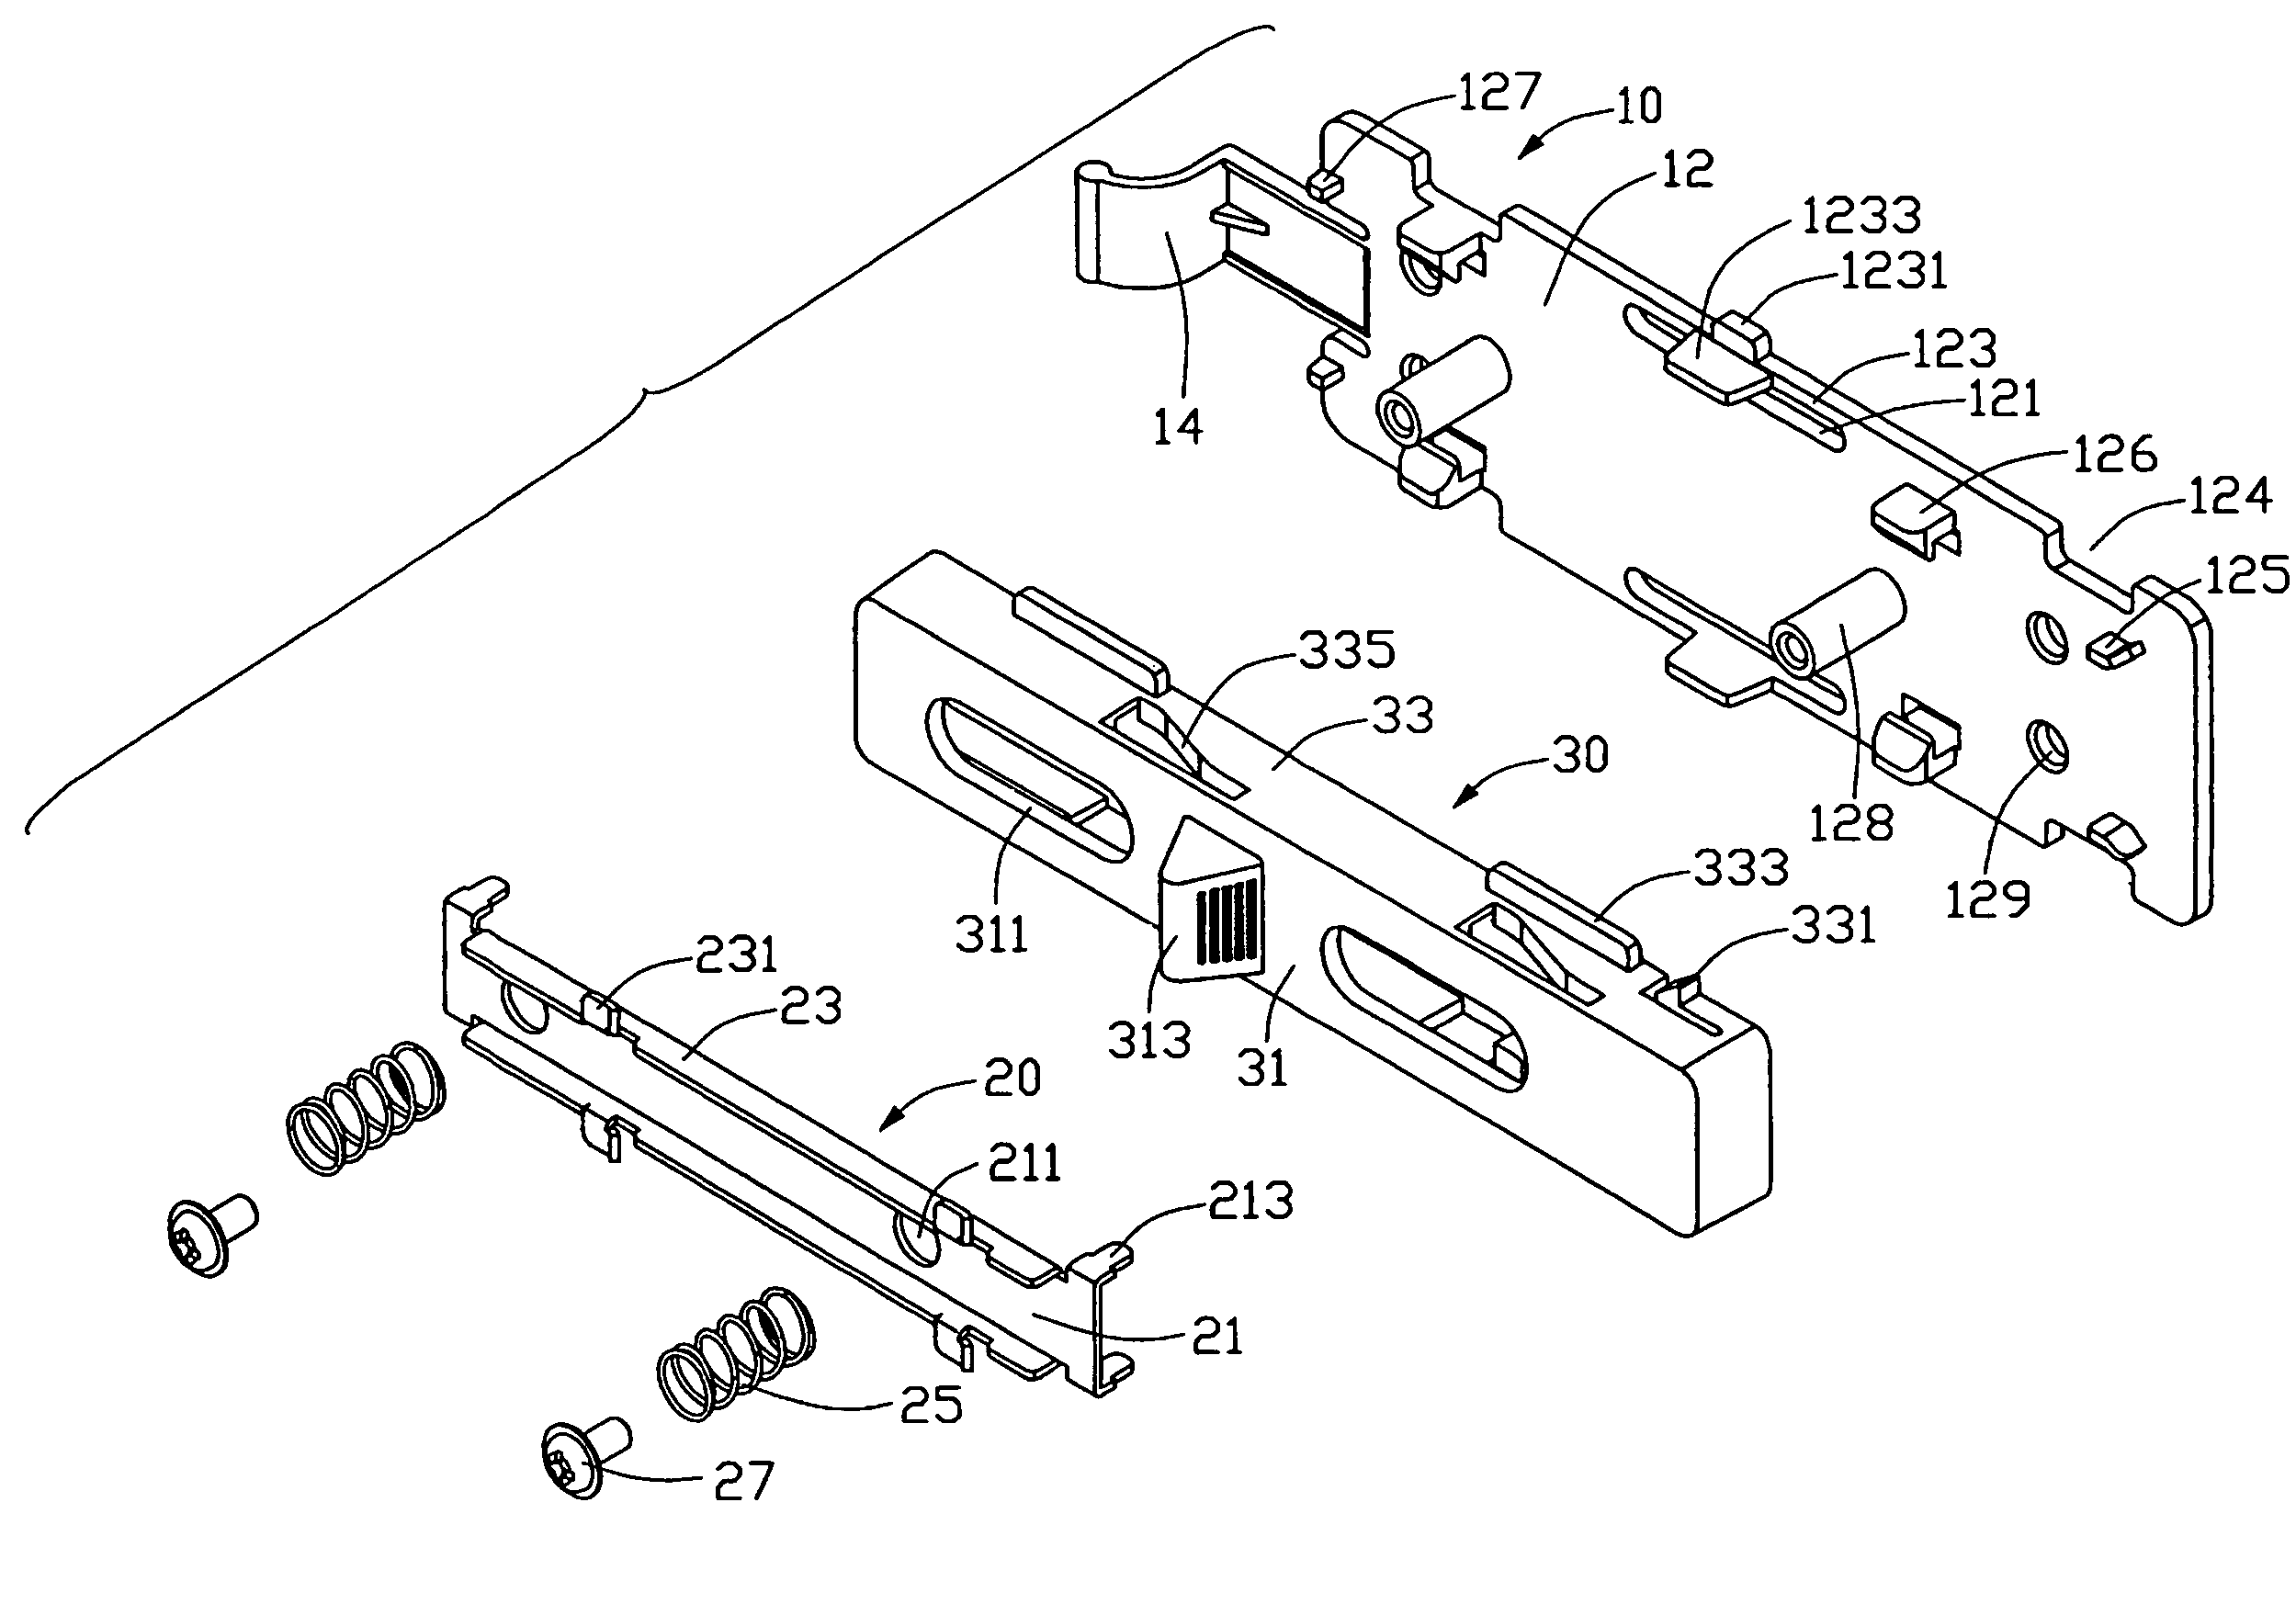 Mounting apparatus for storage devices